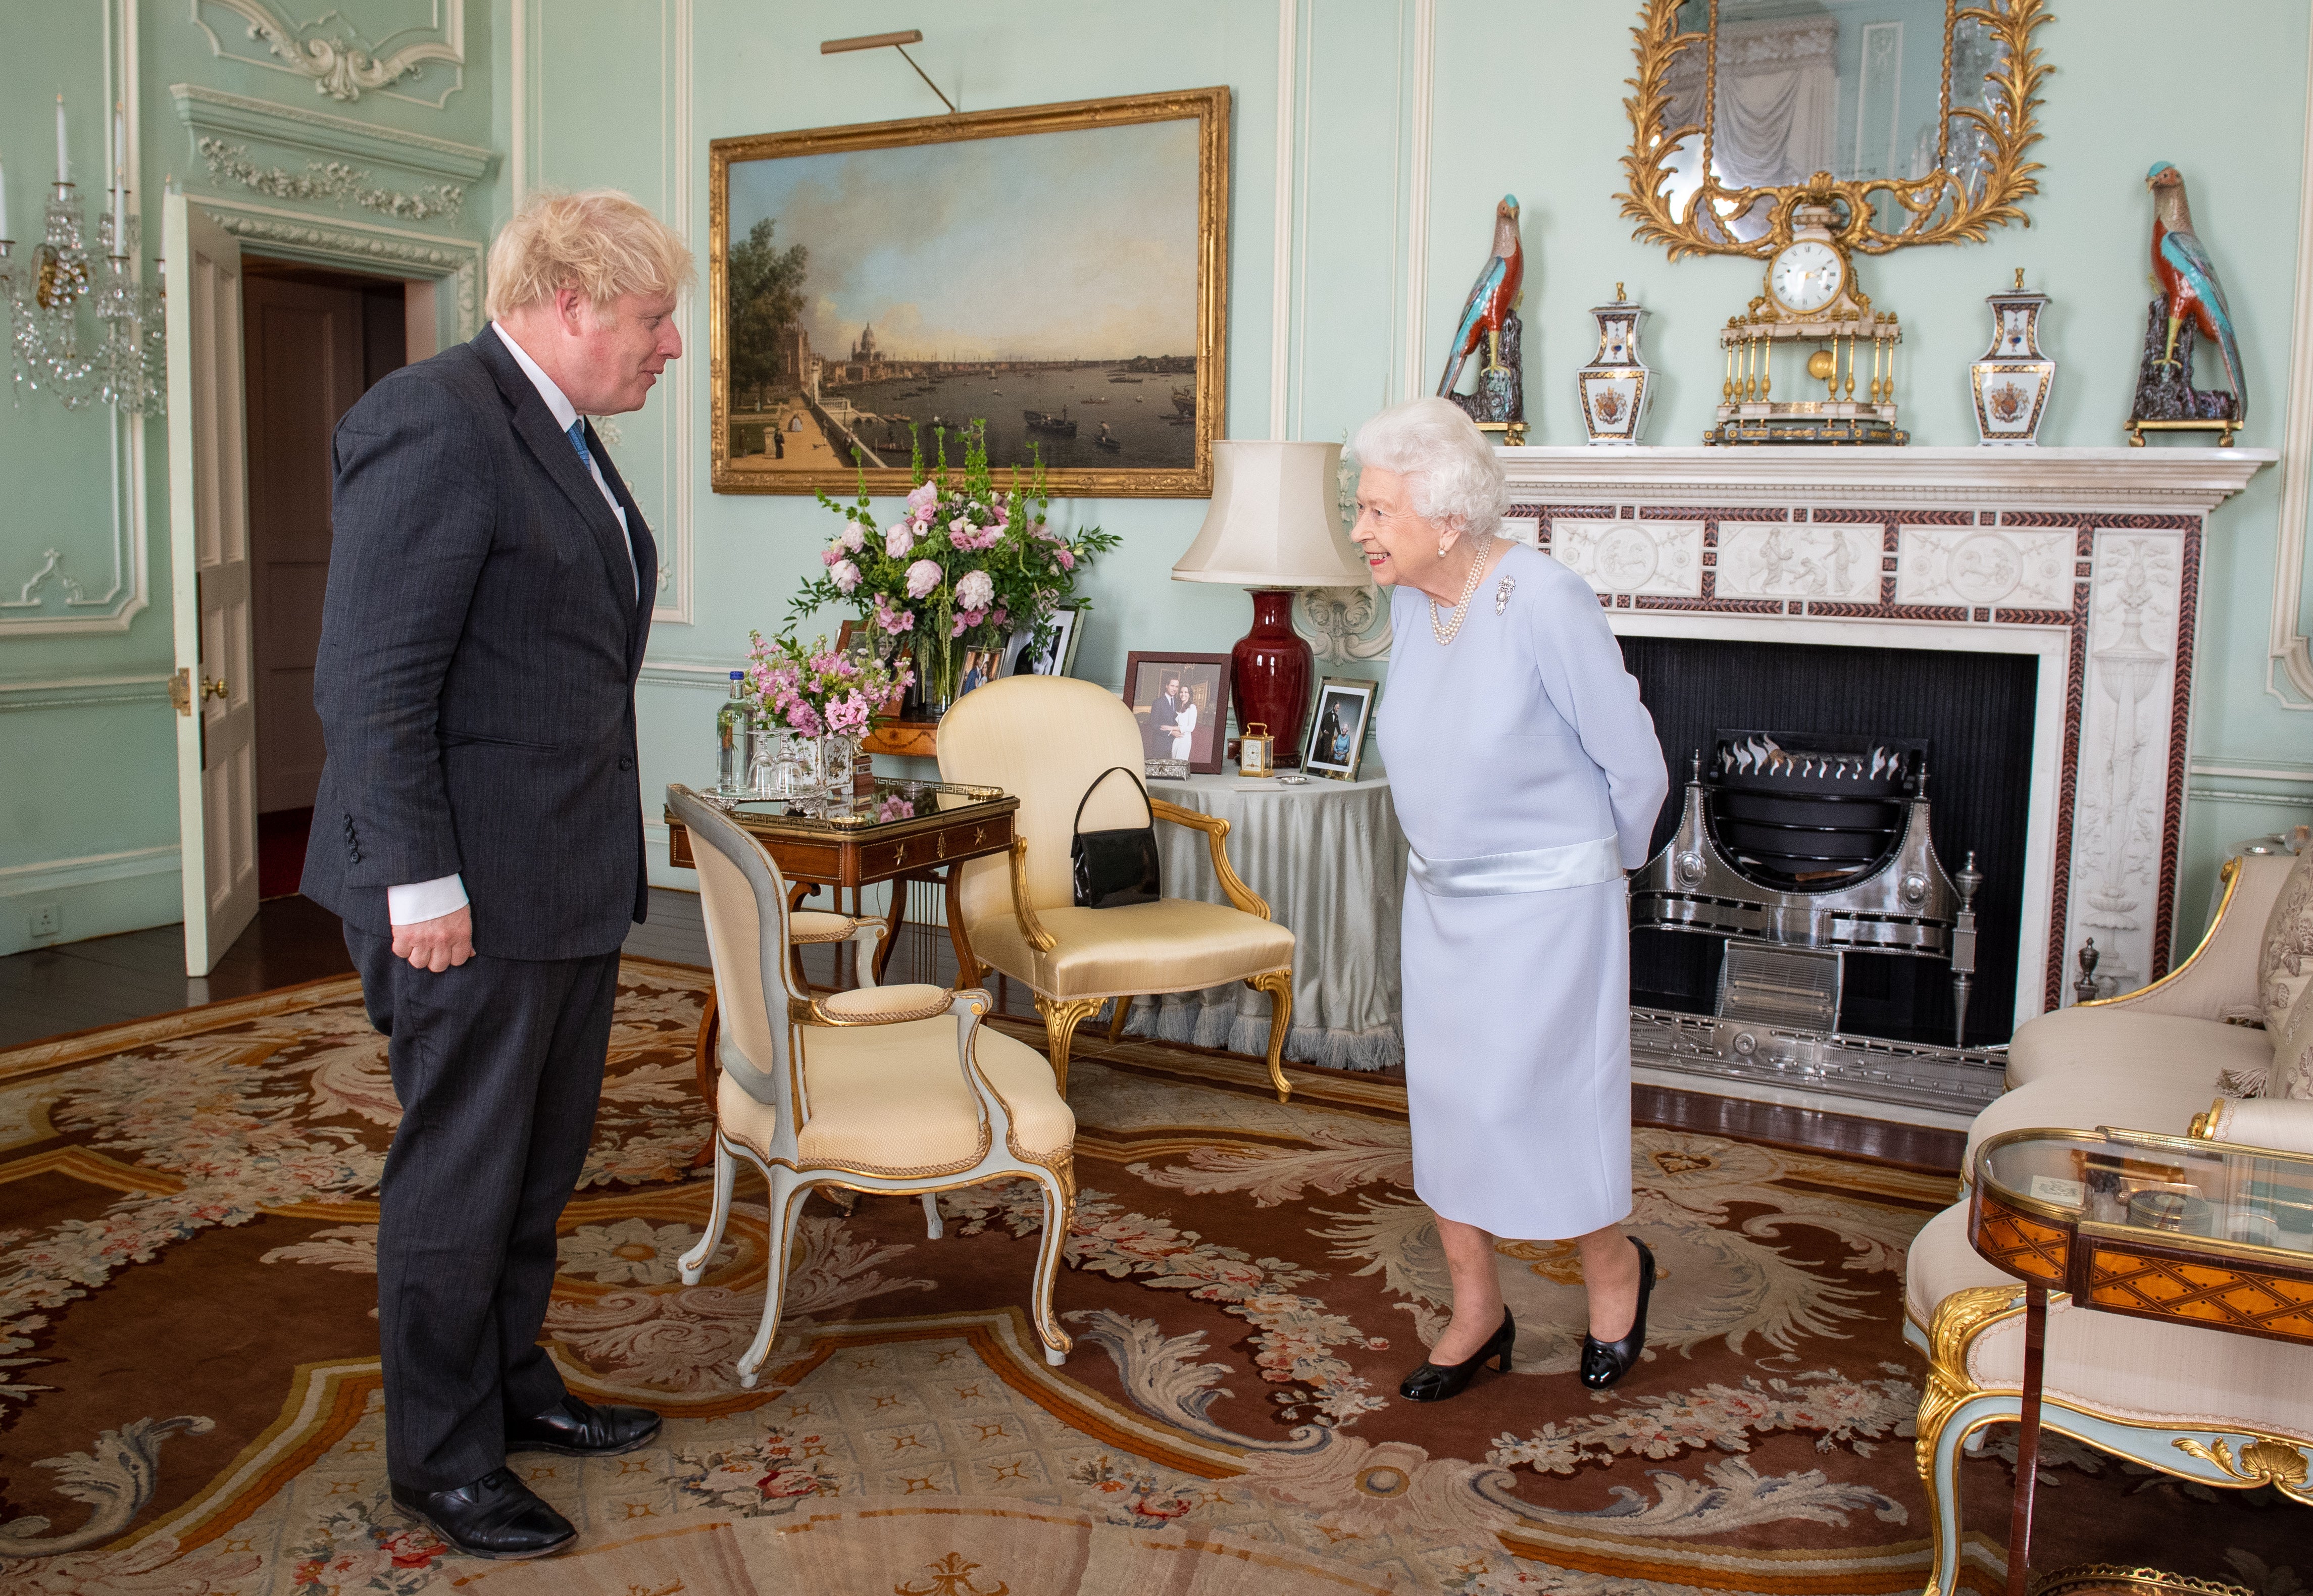 Queen Elizabeth II greeting Boris Johnson at Buckingham Palace for their first in-person weekly audience during the coronavirus pandemic (PA)